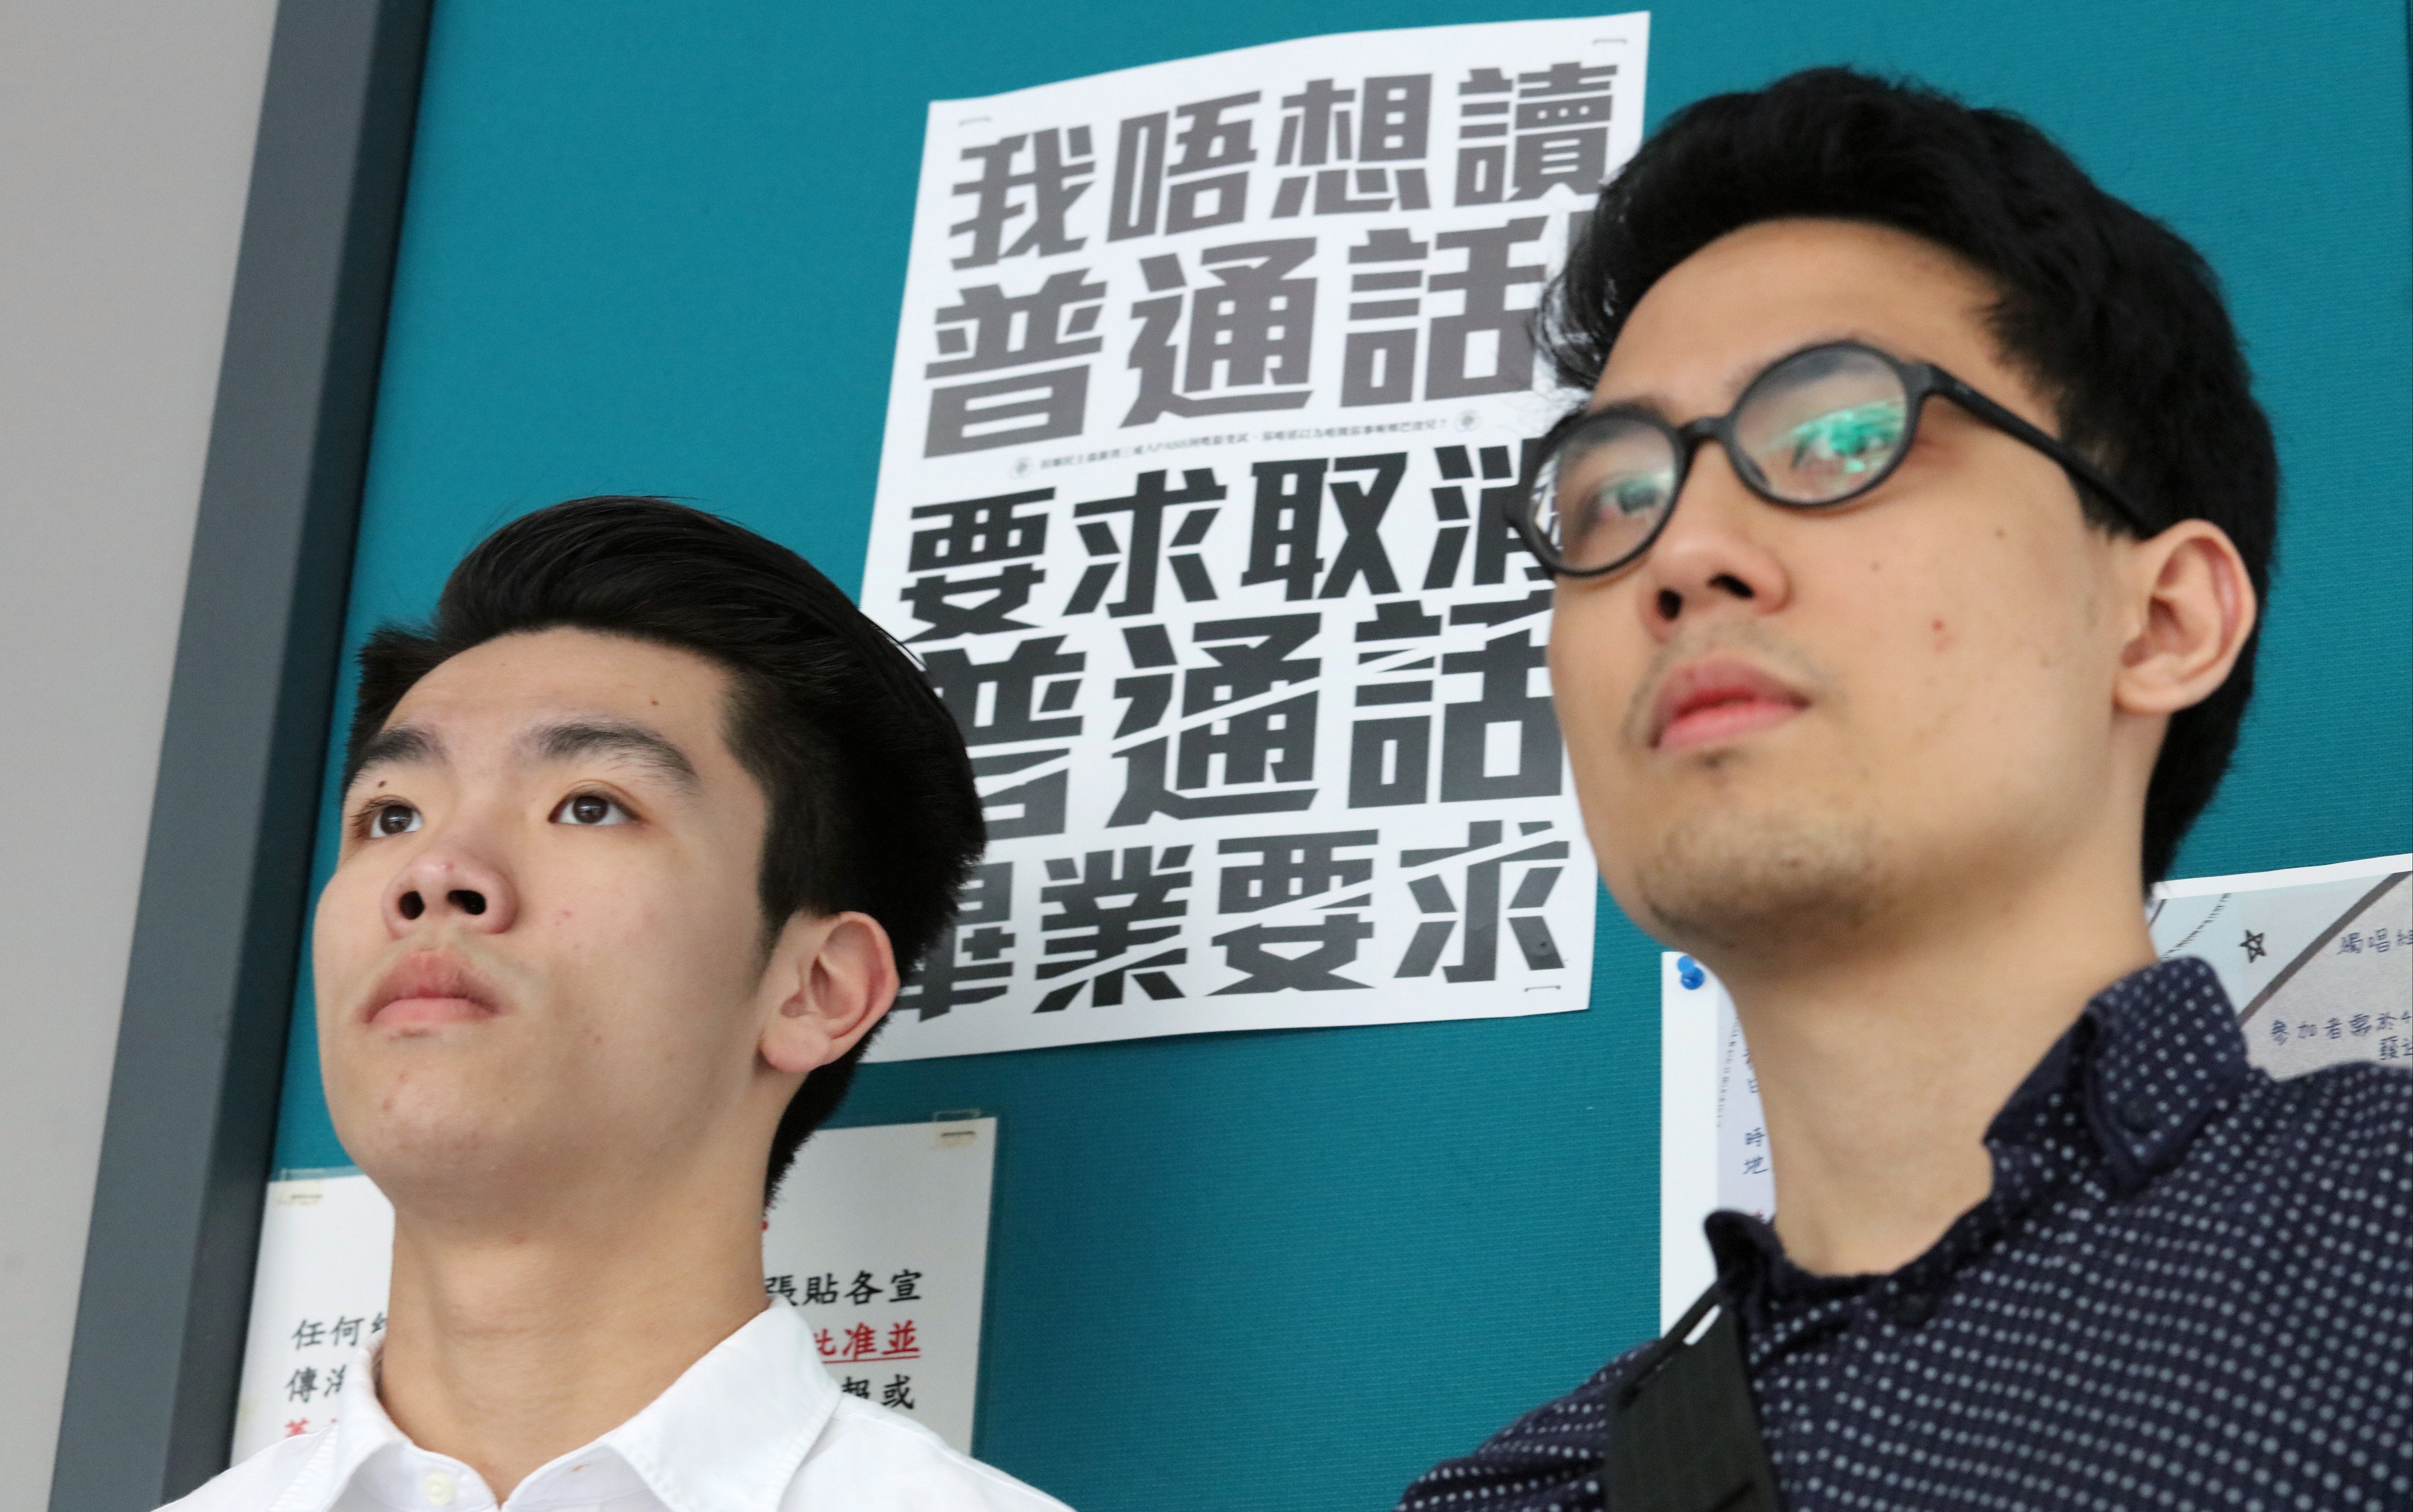 Former student union leader Lau Tsz-kei (left) and Chinese medicine student Andrew Chan Lok-hang meet the press regarding the disciplinary action taken against them. Photo: Felix Wong